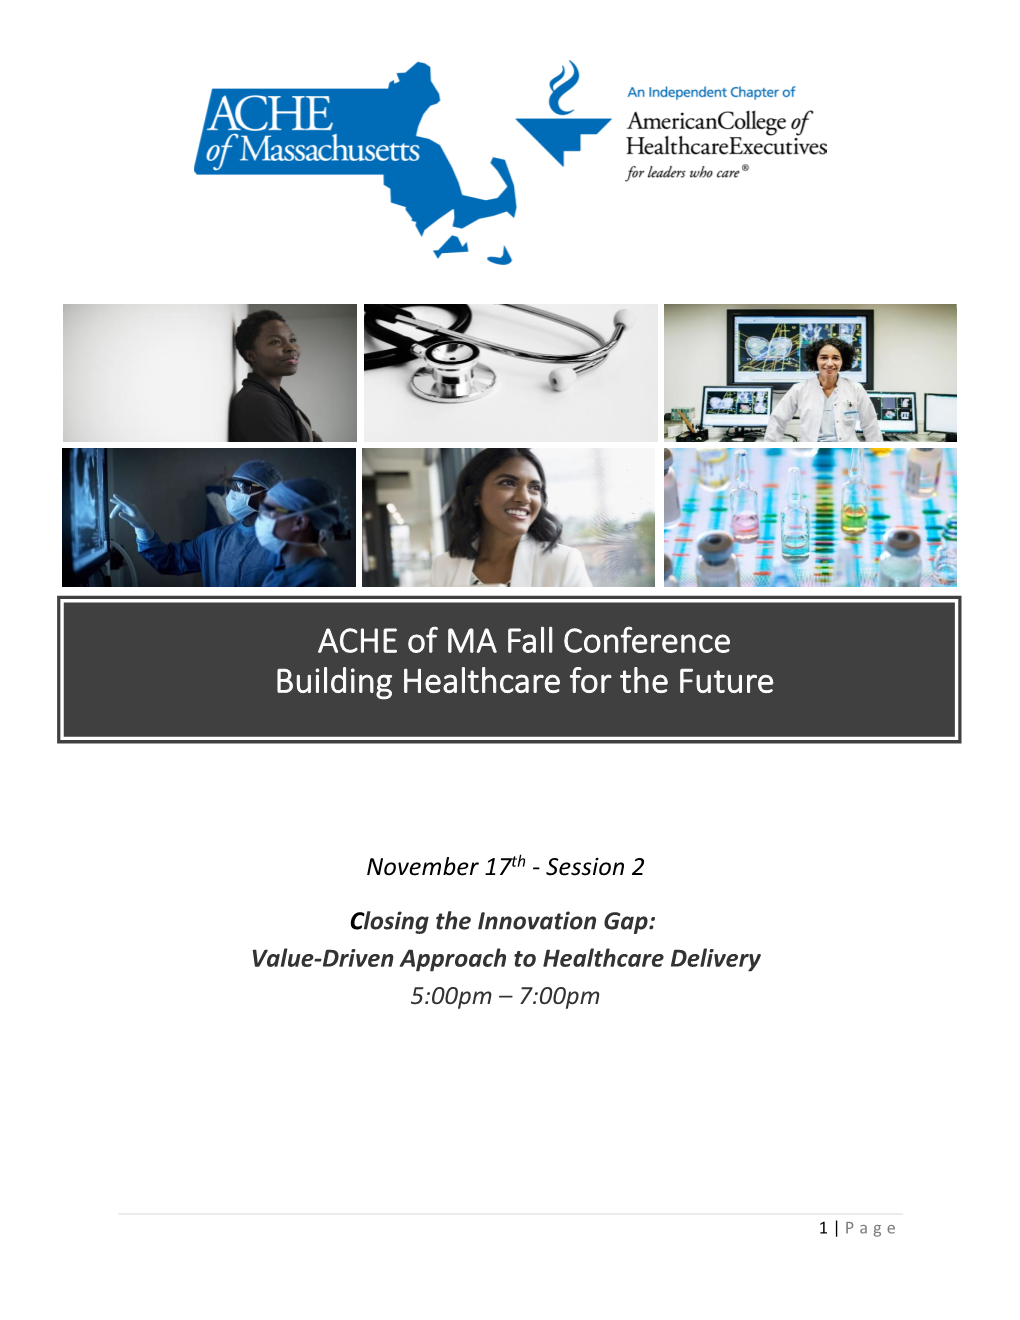 ACHE of MA Fall Conference Building Healthcare for the Future